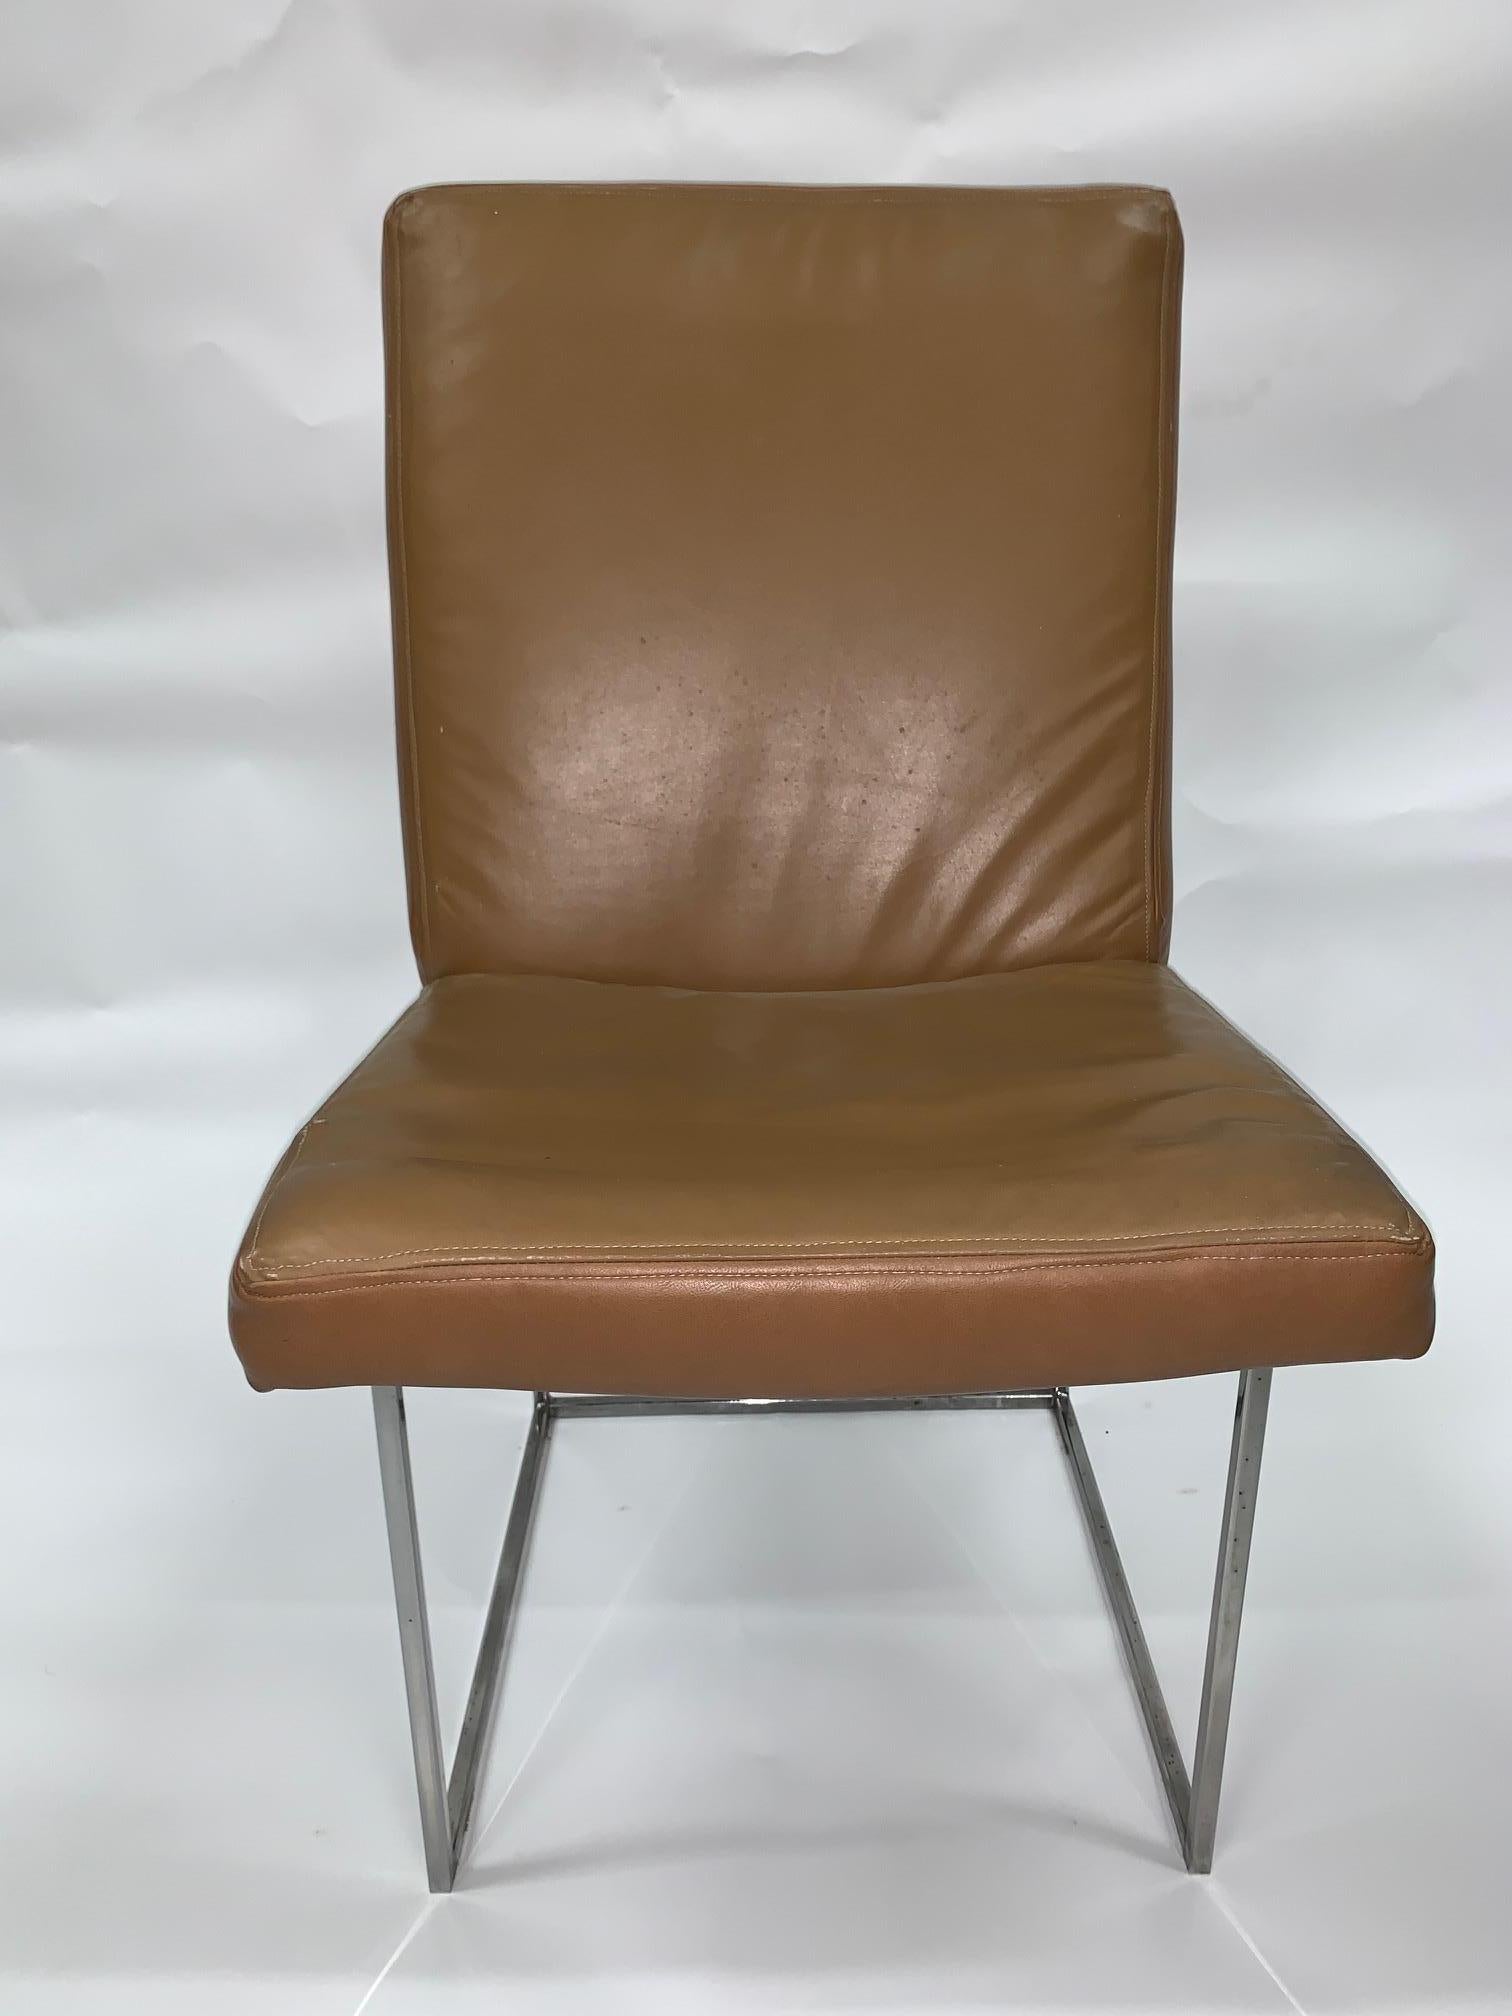 Metalwork 4 Leather Milo Baughman Dining Chairs -original leather For Sale